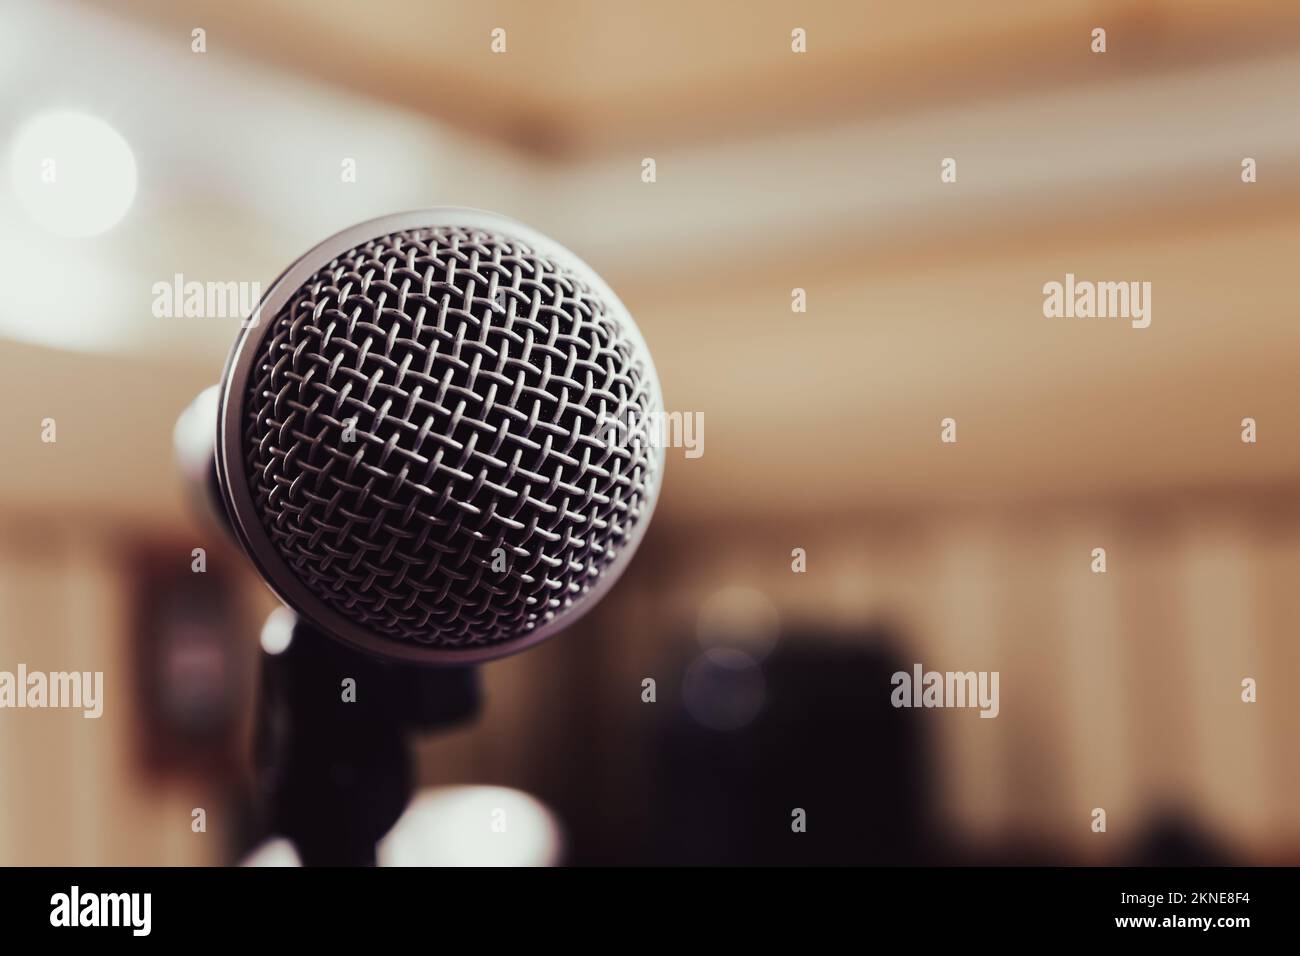 Detail of microphone metallic grid front against defocused background copy space on the right, voice speech singing live music concept Stock Photo